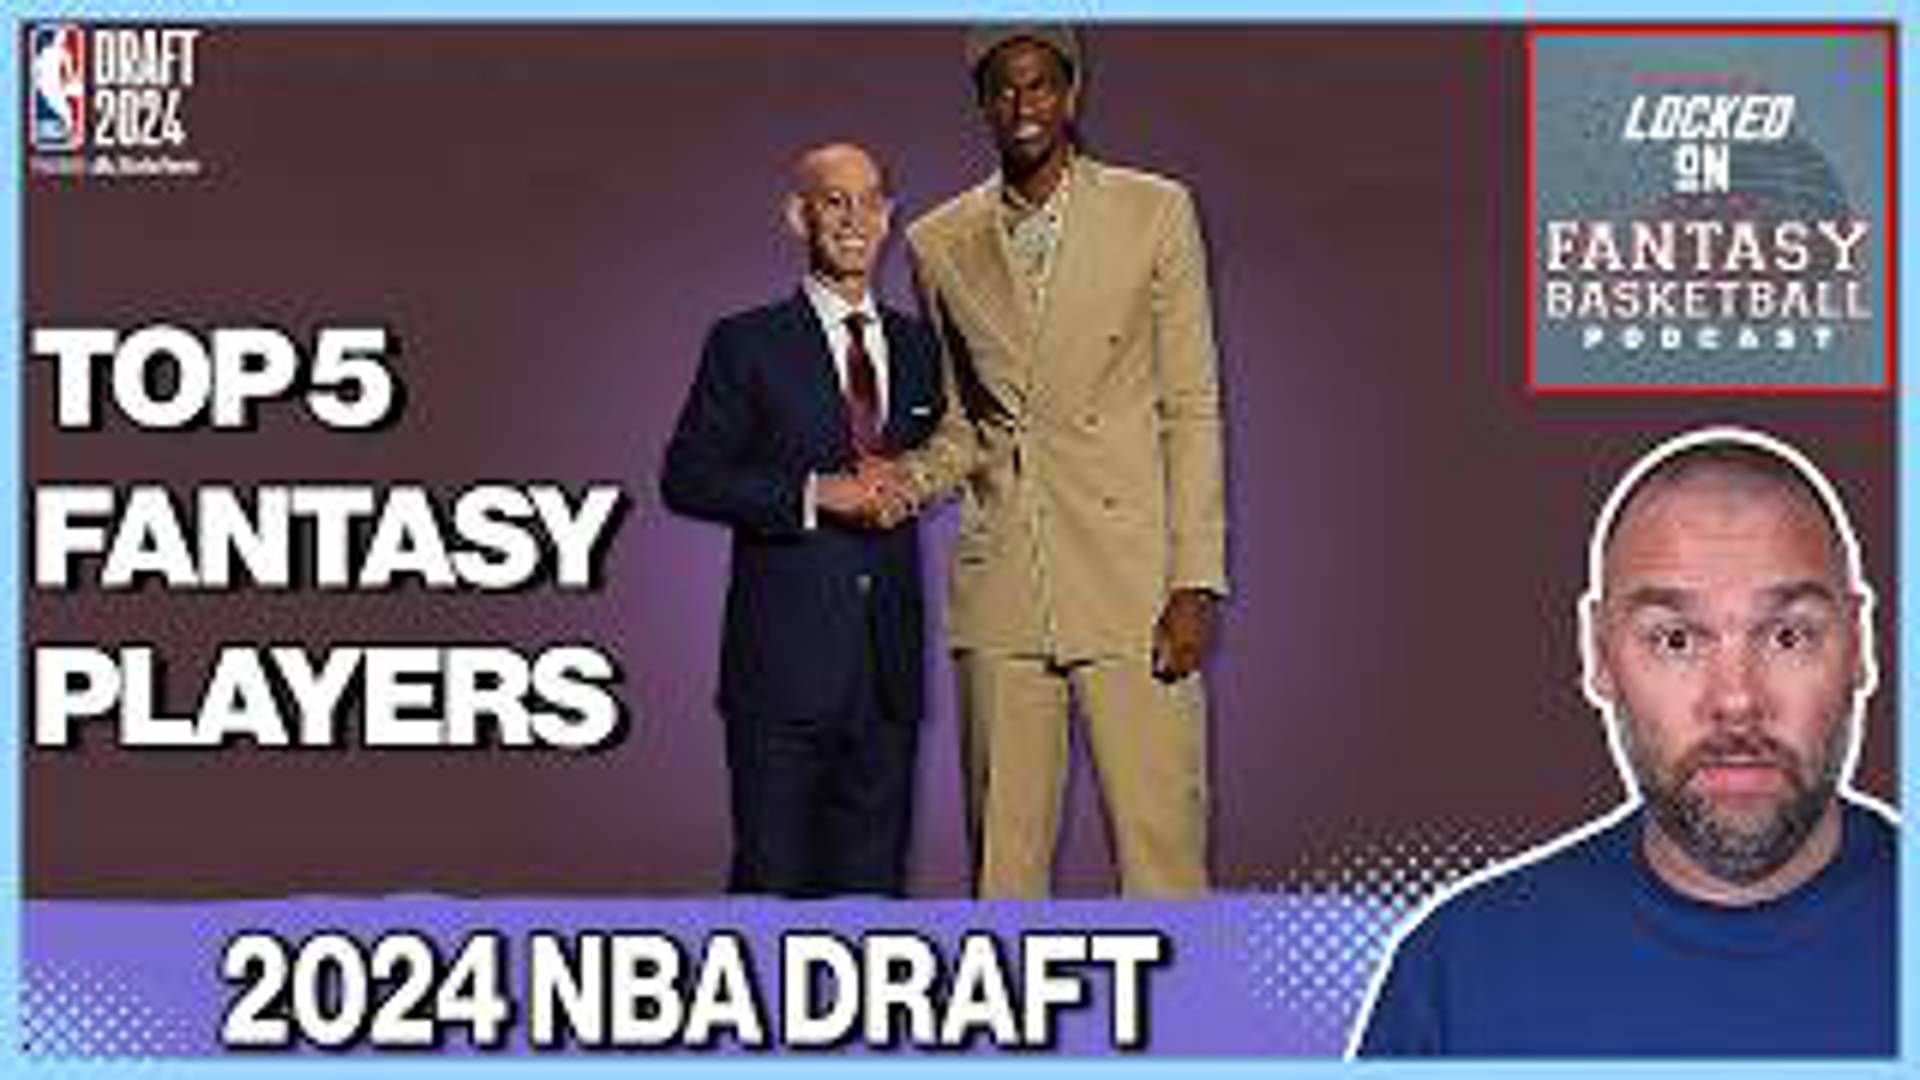 Welcome to Locked On Fantasy Basketball with Josh Lloyd! In this episode, we recap the 2024 NBA Draft, highlighting the top five most intriguing picks.